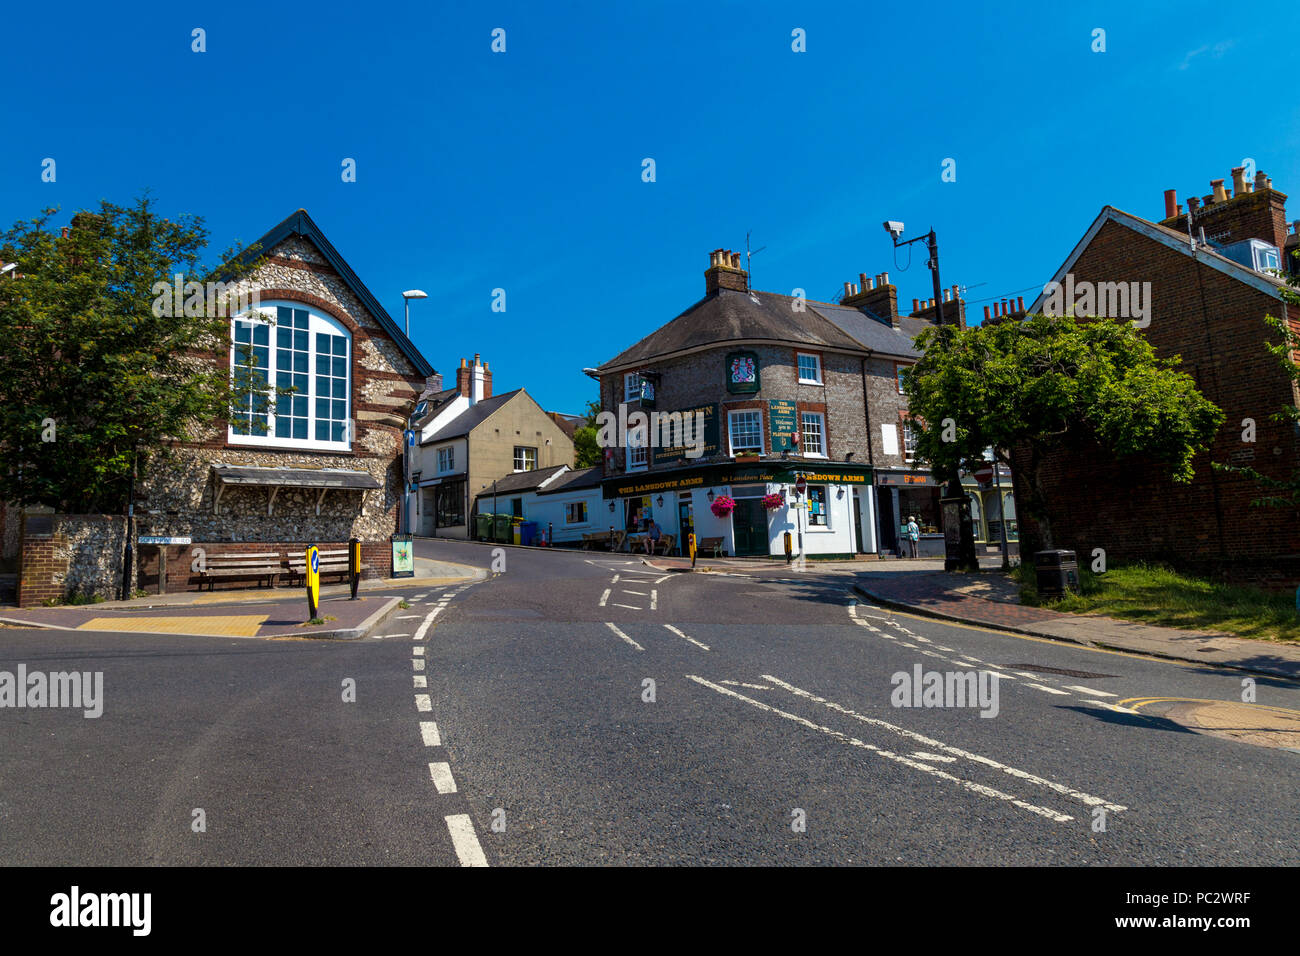 A traditional English town, a street in Lewes with Kingdom Hall on the left and The Lansdown Arms pub on the right, UK Stock Photo